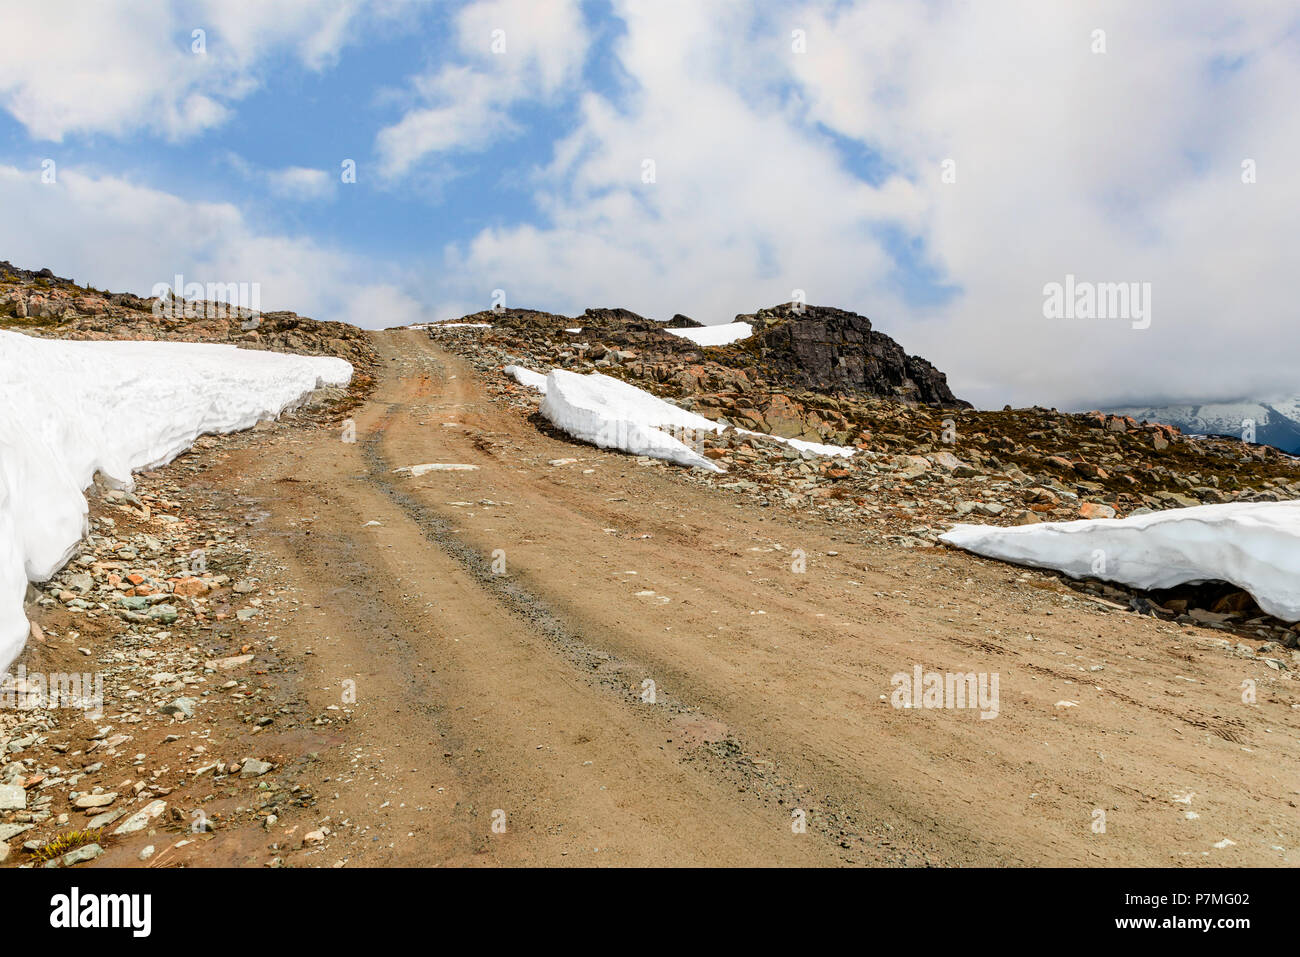 Dirt road, rocky road to the top of a rocky mountain covered with snowdrifts, a misty blue sky in the background with white clouds on a summer day Stock Photo